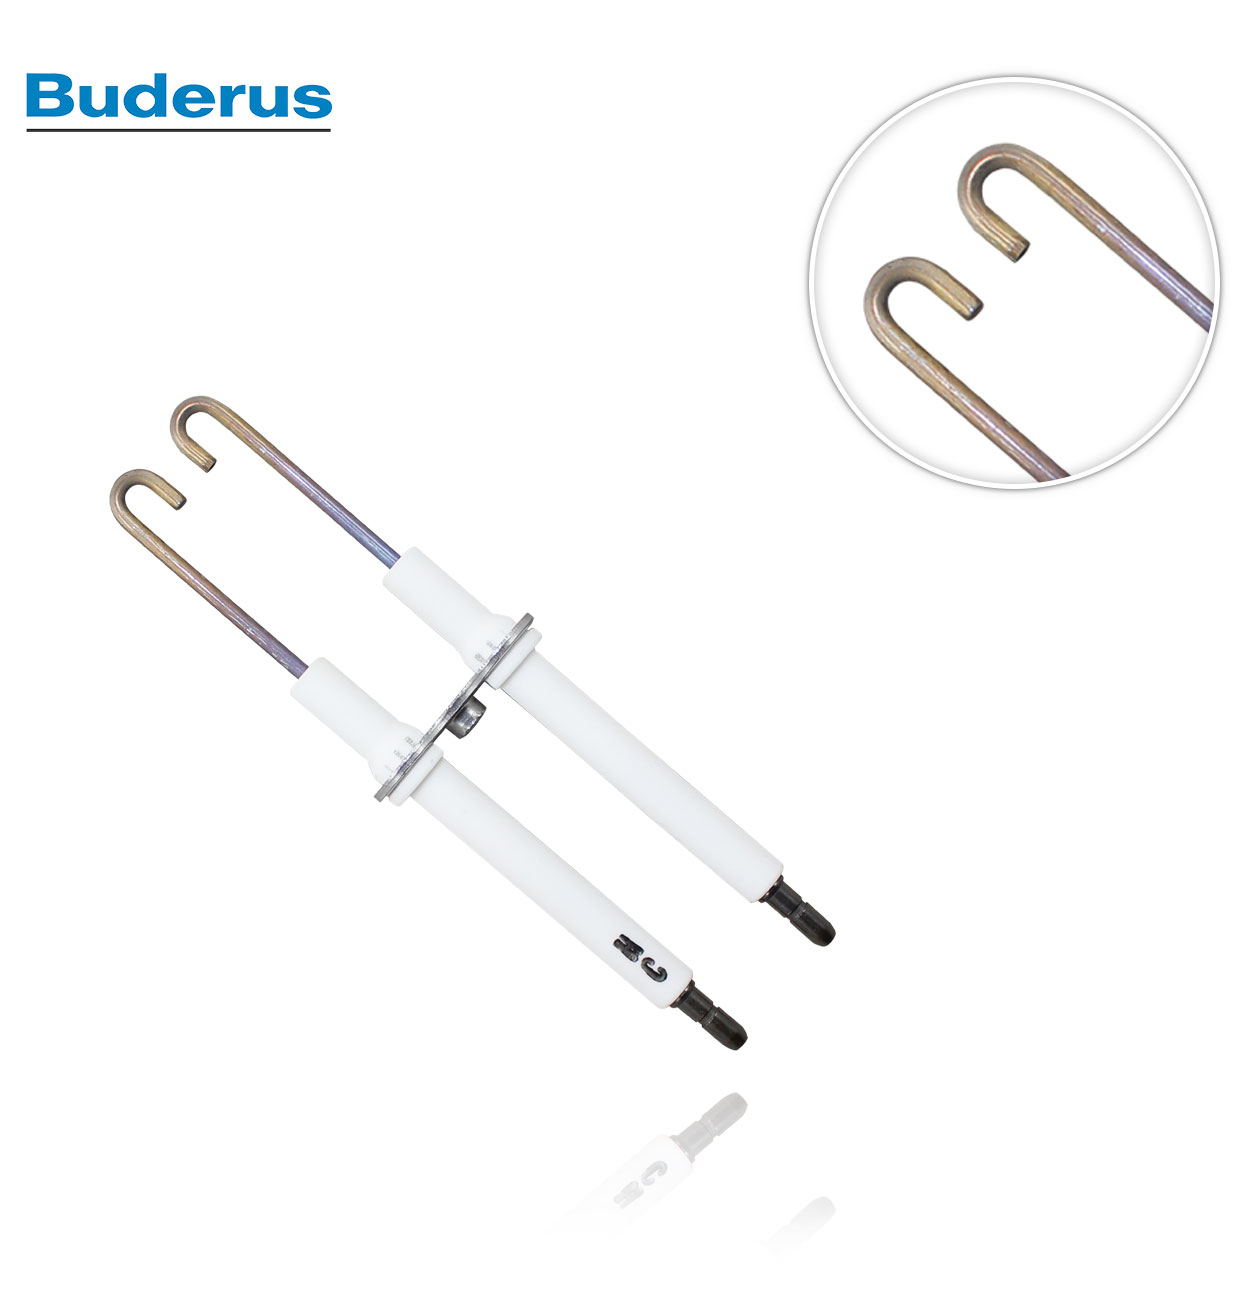 BE1.0-2.3, BE-A BUDERUS ELECTRODE